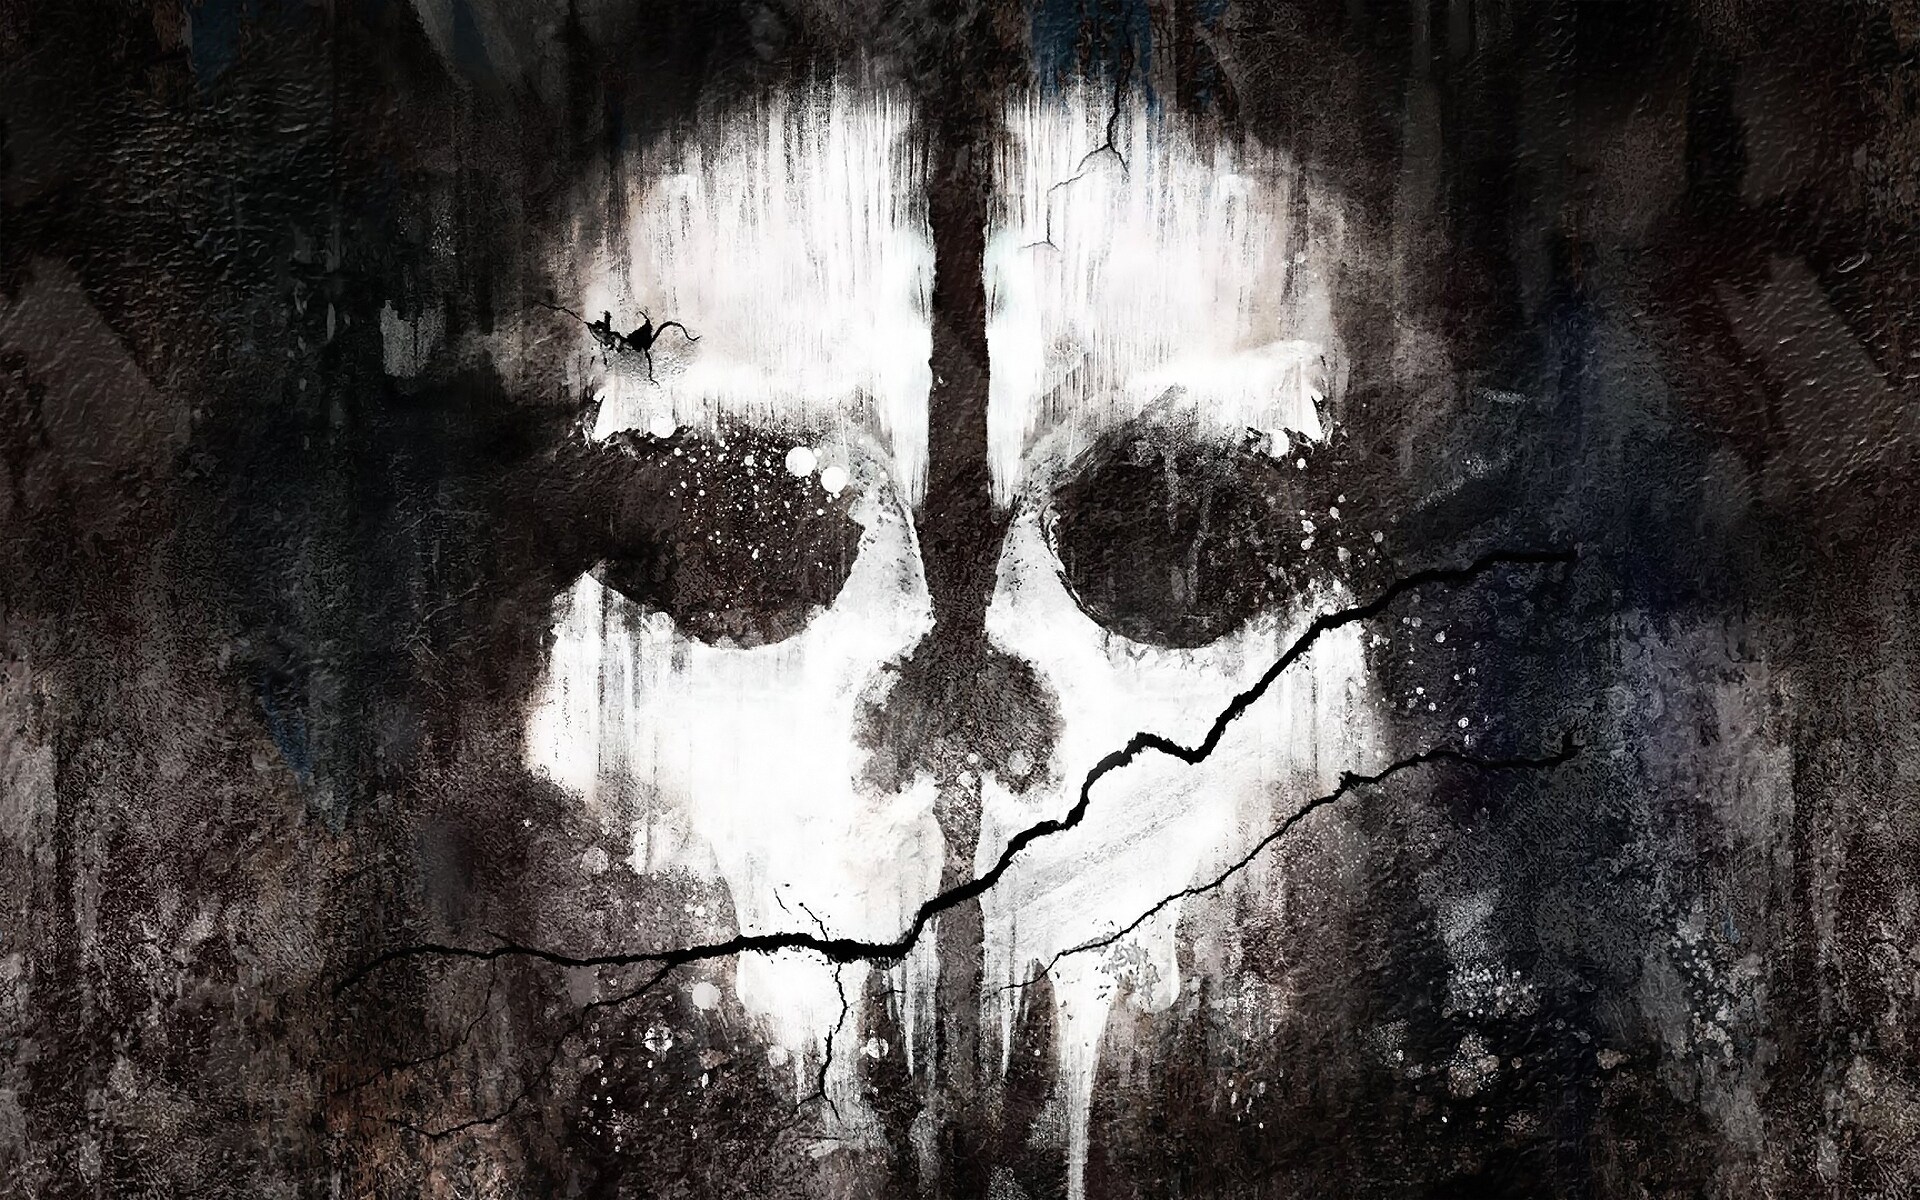 Ruwe olie provincie fluctueren Call of Duty: Ghosts Cheats and Codes for Playstation 3 | Cheat Happens